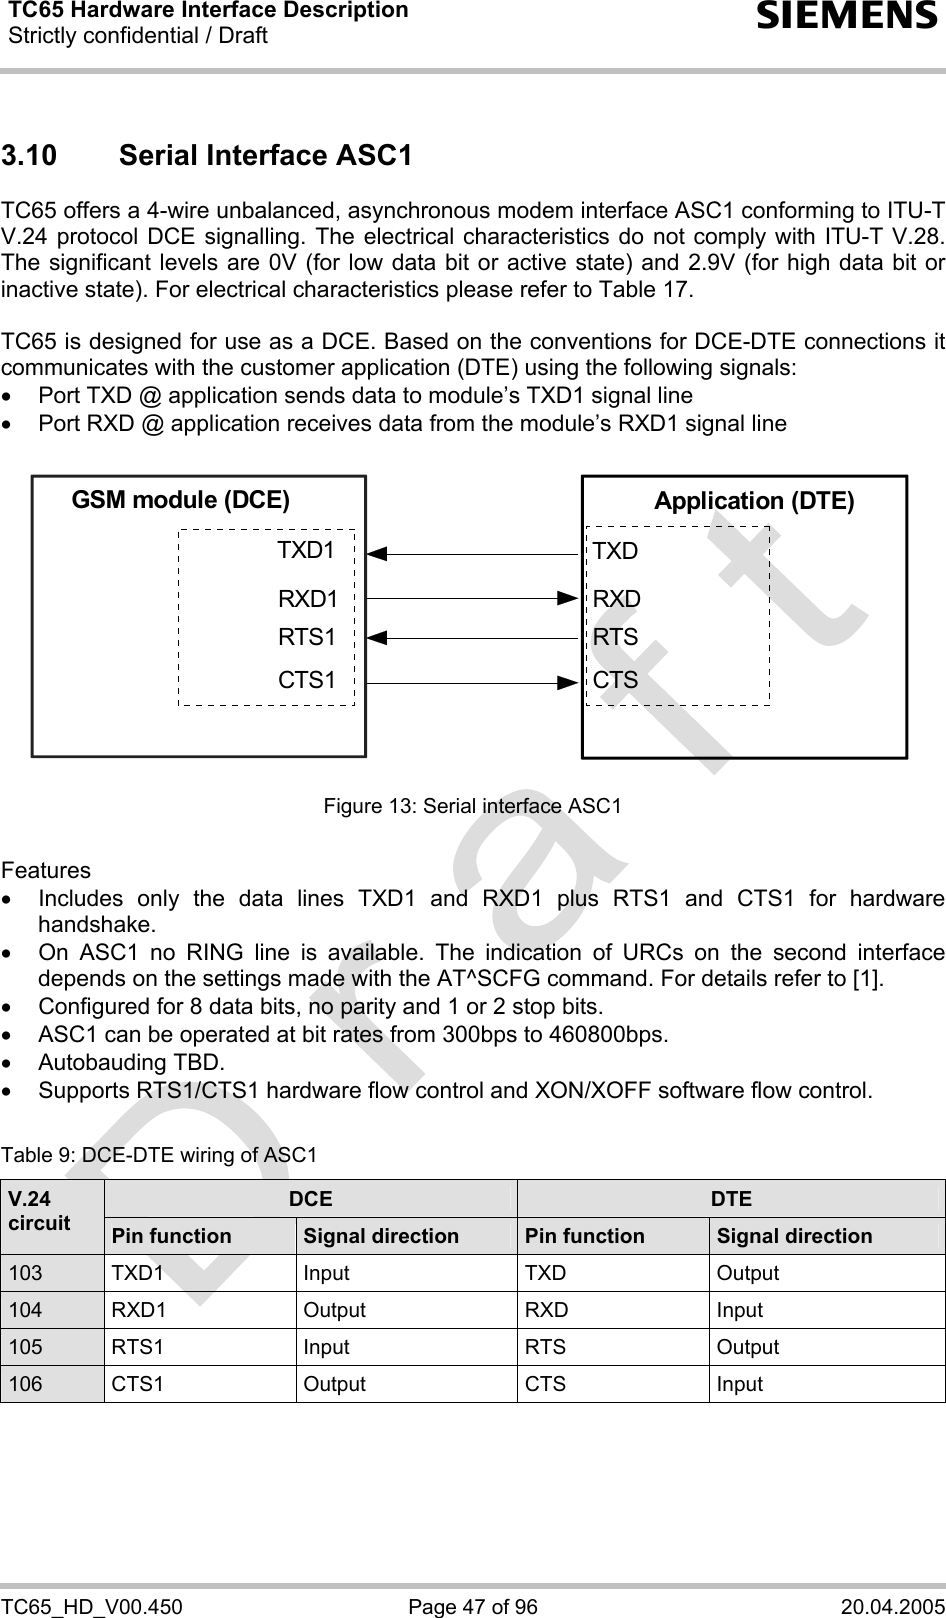 TC65 Hardware Interface Description Strictly confidential / Draft  s TC65_HD_V00.450  Page 47 of 96  20.04.2005 3.10  Serial Interface ASC1 TC65 offers a 4-wire unbalanced, asynchronous modem interface ASC1 conforming to ITU-T V.24 protocol DCE signalling. The electrical characteristics do not comply with ITU-T V.28. The significant levels are 0V (for low data bit or active state) and 2.9V (for high data bit or inactive state). For electrical characteristics please refer to Table 17.  TC65 is designed for use as a DCE. Based on the conventions for DCE-DTE connections it communicates with the customer application (DTE) using the following signals: •  Port TXD @ application sends data to module’s TXD1 signal line •  Port RXD @ application receives data from the module’s RXD1 signal line  GSM module (DCE) Application (DTE)TXDRXDRTSCTSTXD1RXD1RTS1CTS1 Figure 13: Serial interface ASC1  Features •  Includes only the data lines TXD1 and RXD1 plus RTS1 and CTS1 for hardware handshake.  •  On ASC1 no RING line is available. The indication of URCs on the second interface depends on the settings made with the AT^SCFG command. For details refer to [1]. •  Configured for 8 data bits, no parity and 1 or 2 stop bits. •  ASC1 can be operated at bit rates from 300bps to 460800bps.  • Autobauding TBD. •  Supports RTS1/CTS1 hardware flow control and XON/XOFF software flow control.  Table 9: DCE-DTE wiring of ASC1 DCE  DTE V.24 circuit  Pin function  Signal direction  Pin function  Signal direction 103 TXD1  Input  TXD  Output 104 RXD1  Output  RXD  Input 105 RTS1  Input  RTS  Output 106 CTS1  Output  CTS  Input   